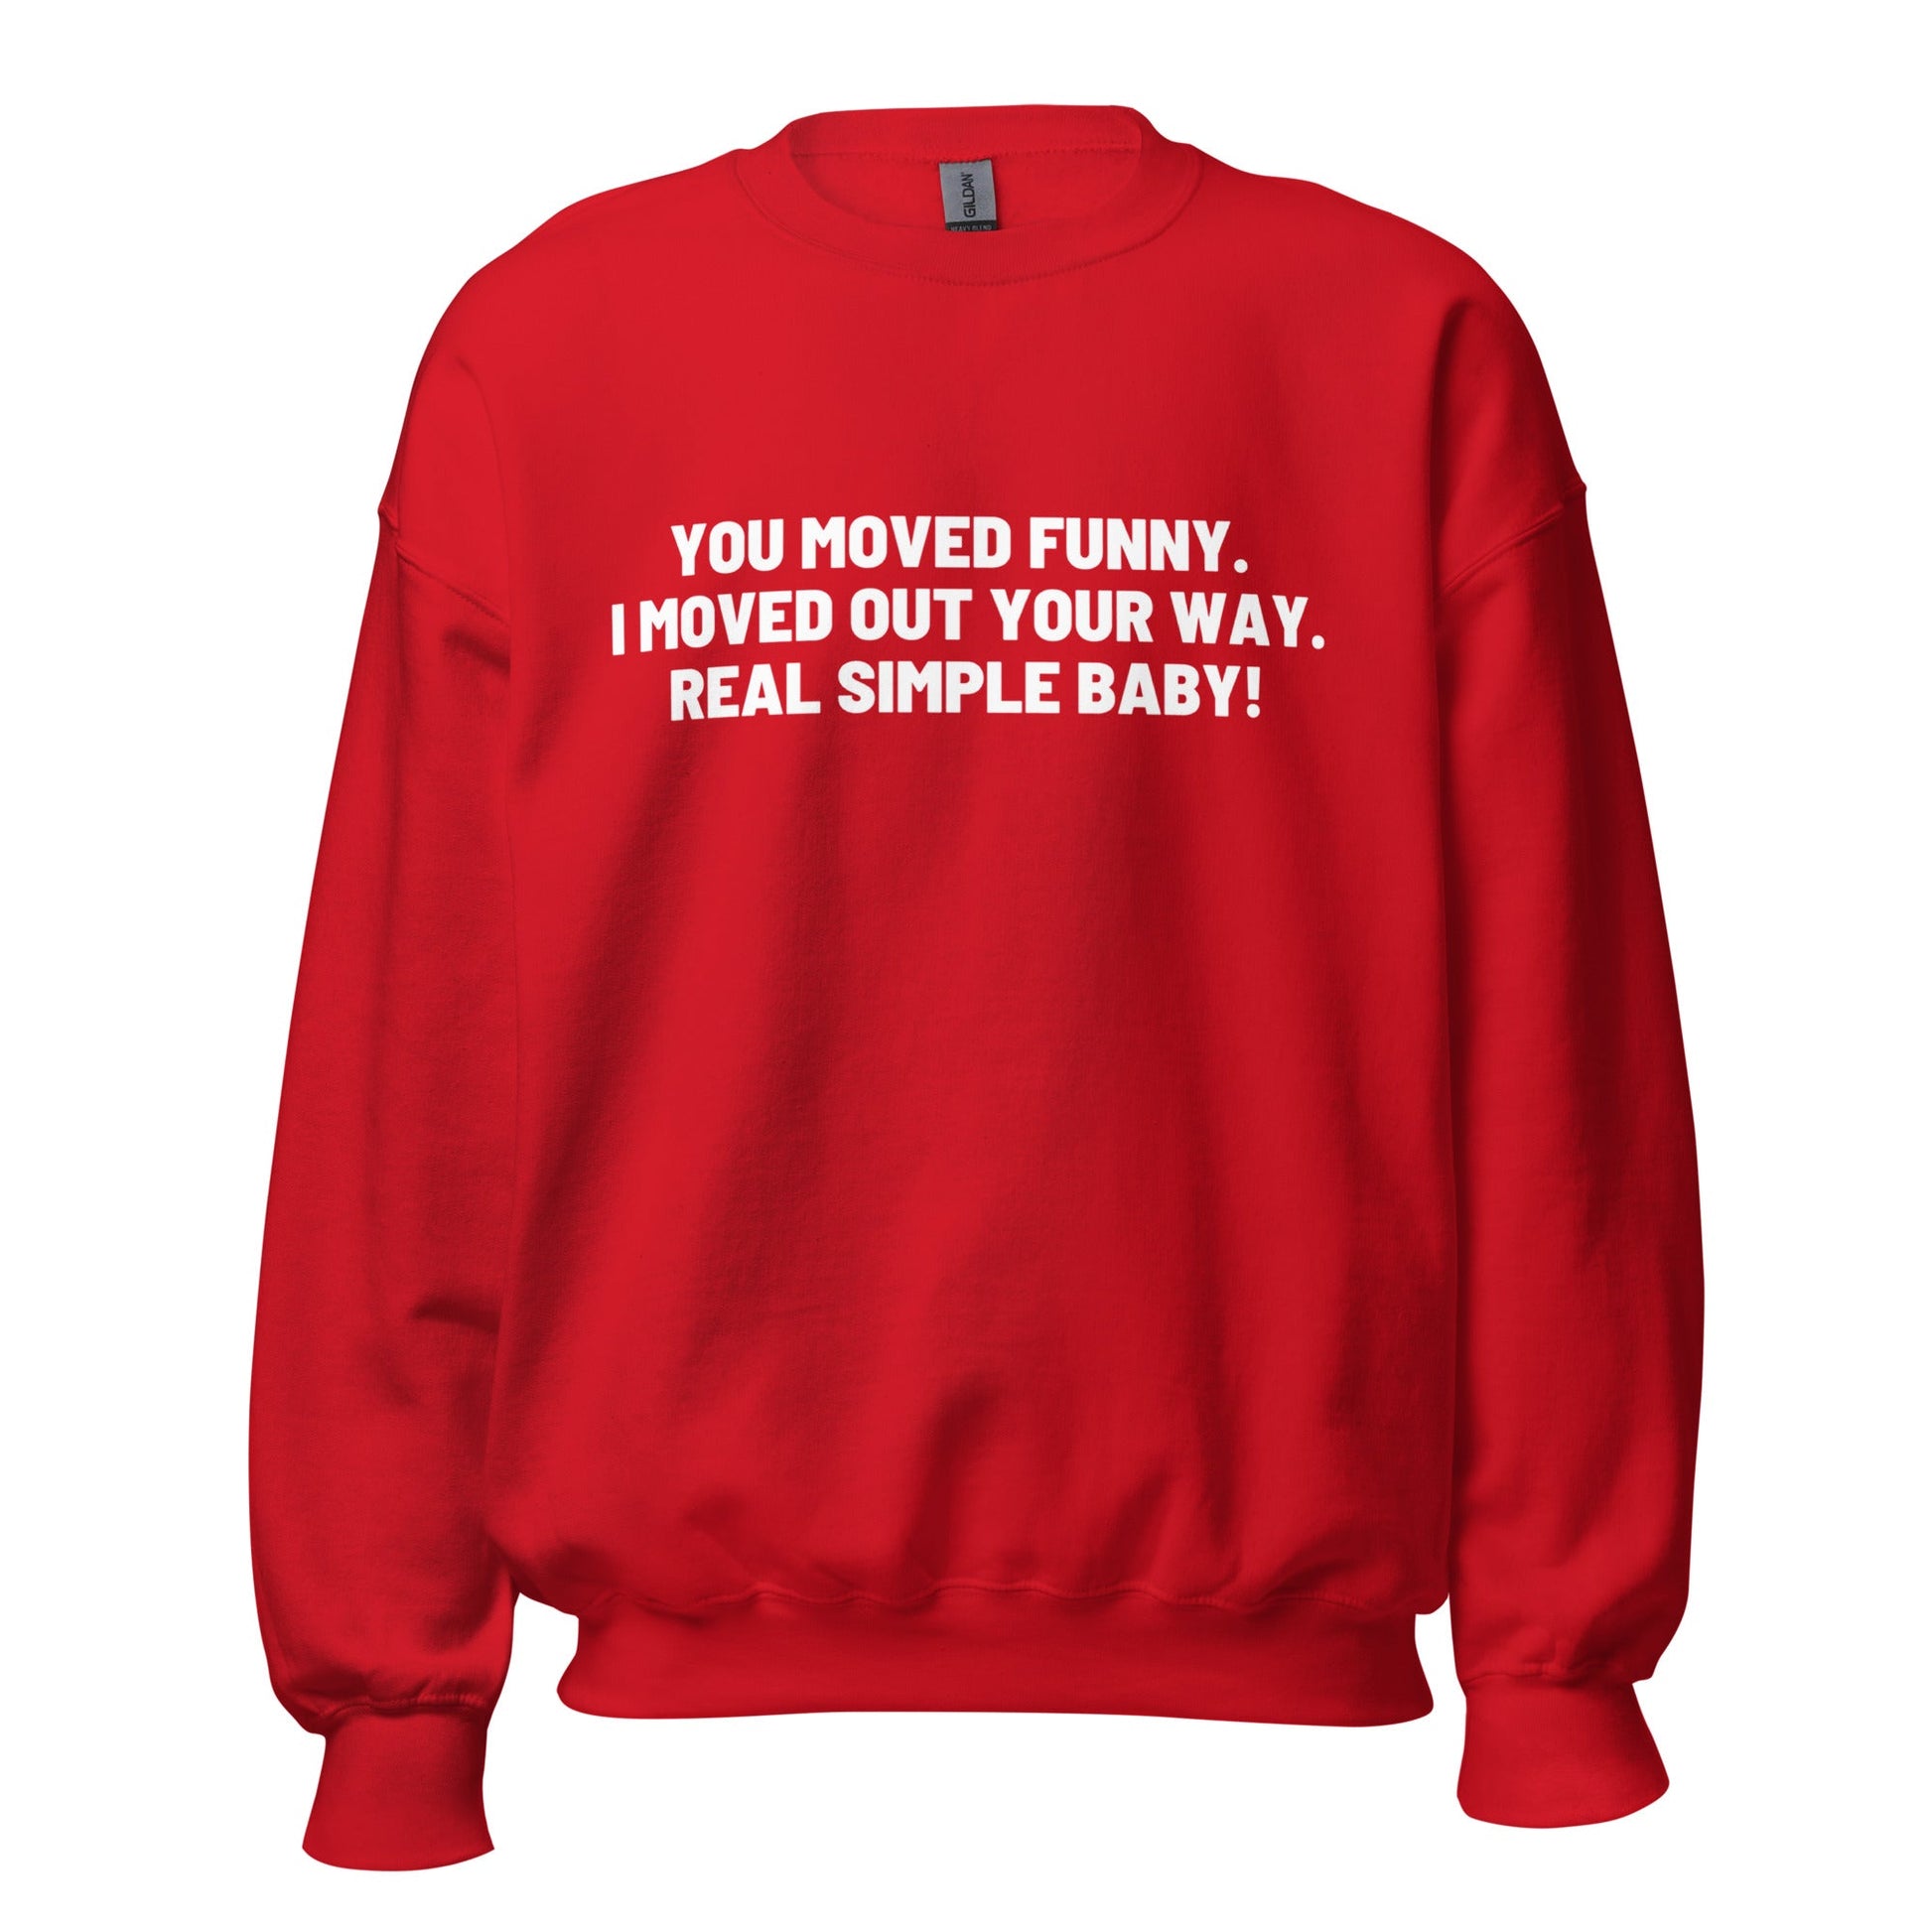 You Moved Funny. I Moved Out Your Way. Real Simple Baby. Unisex Sweatshirt - Catch This Tea Shirt